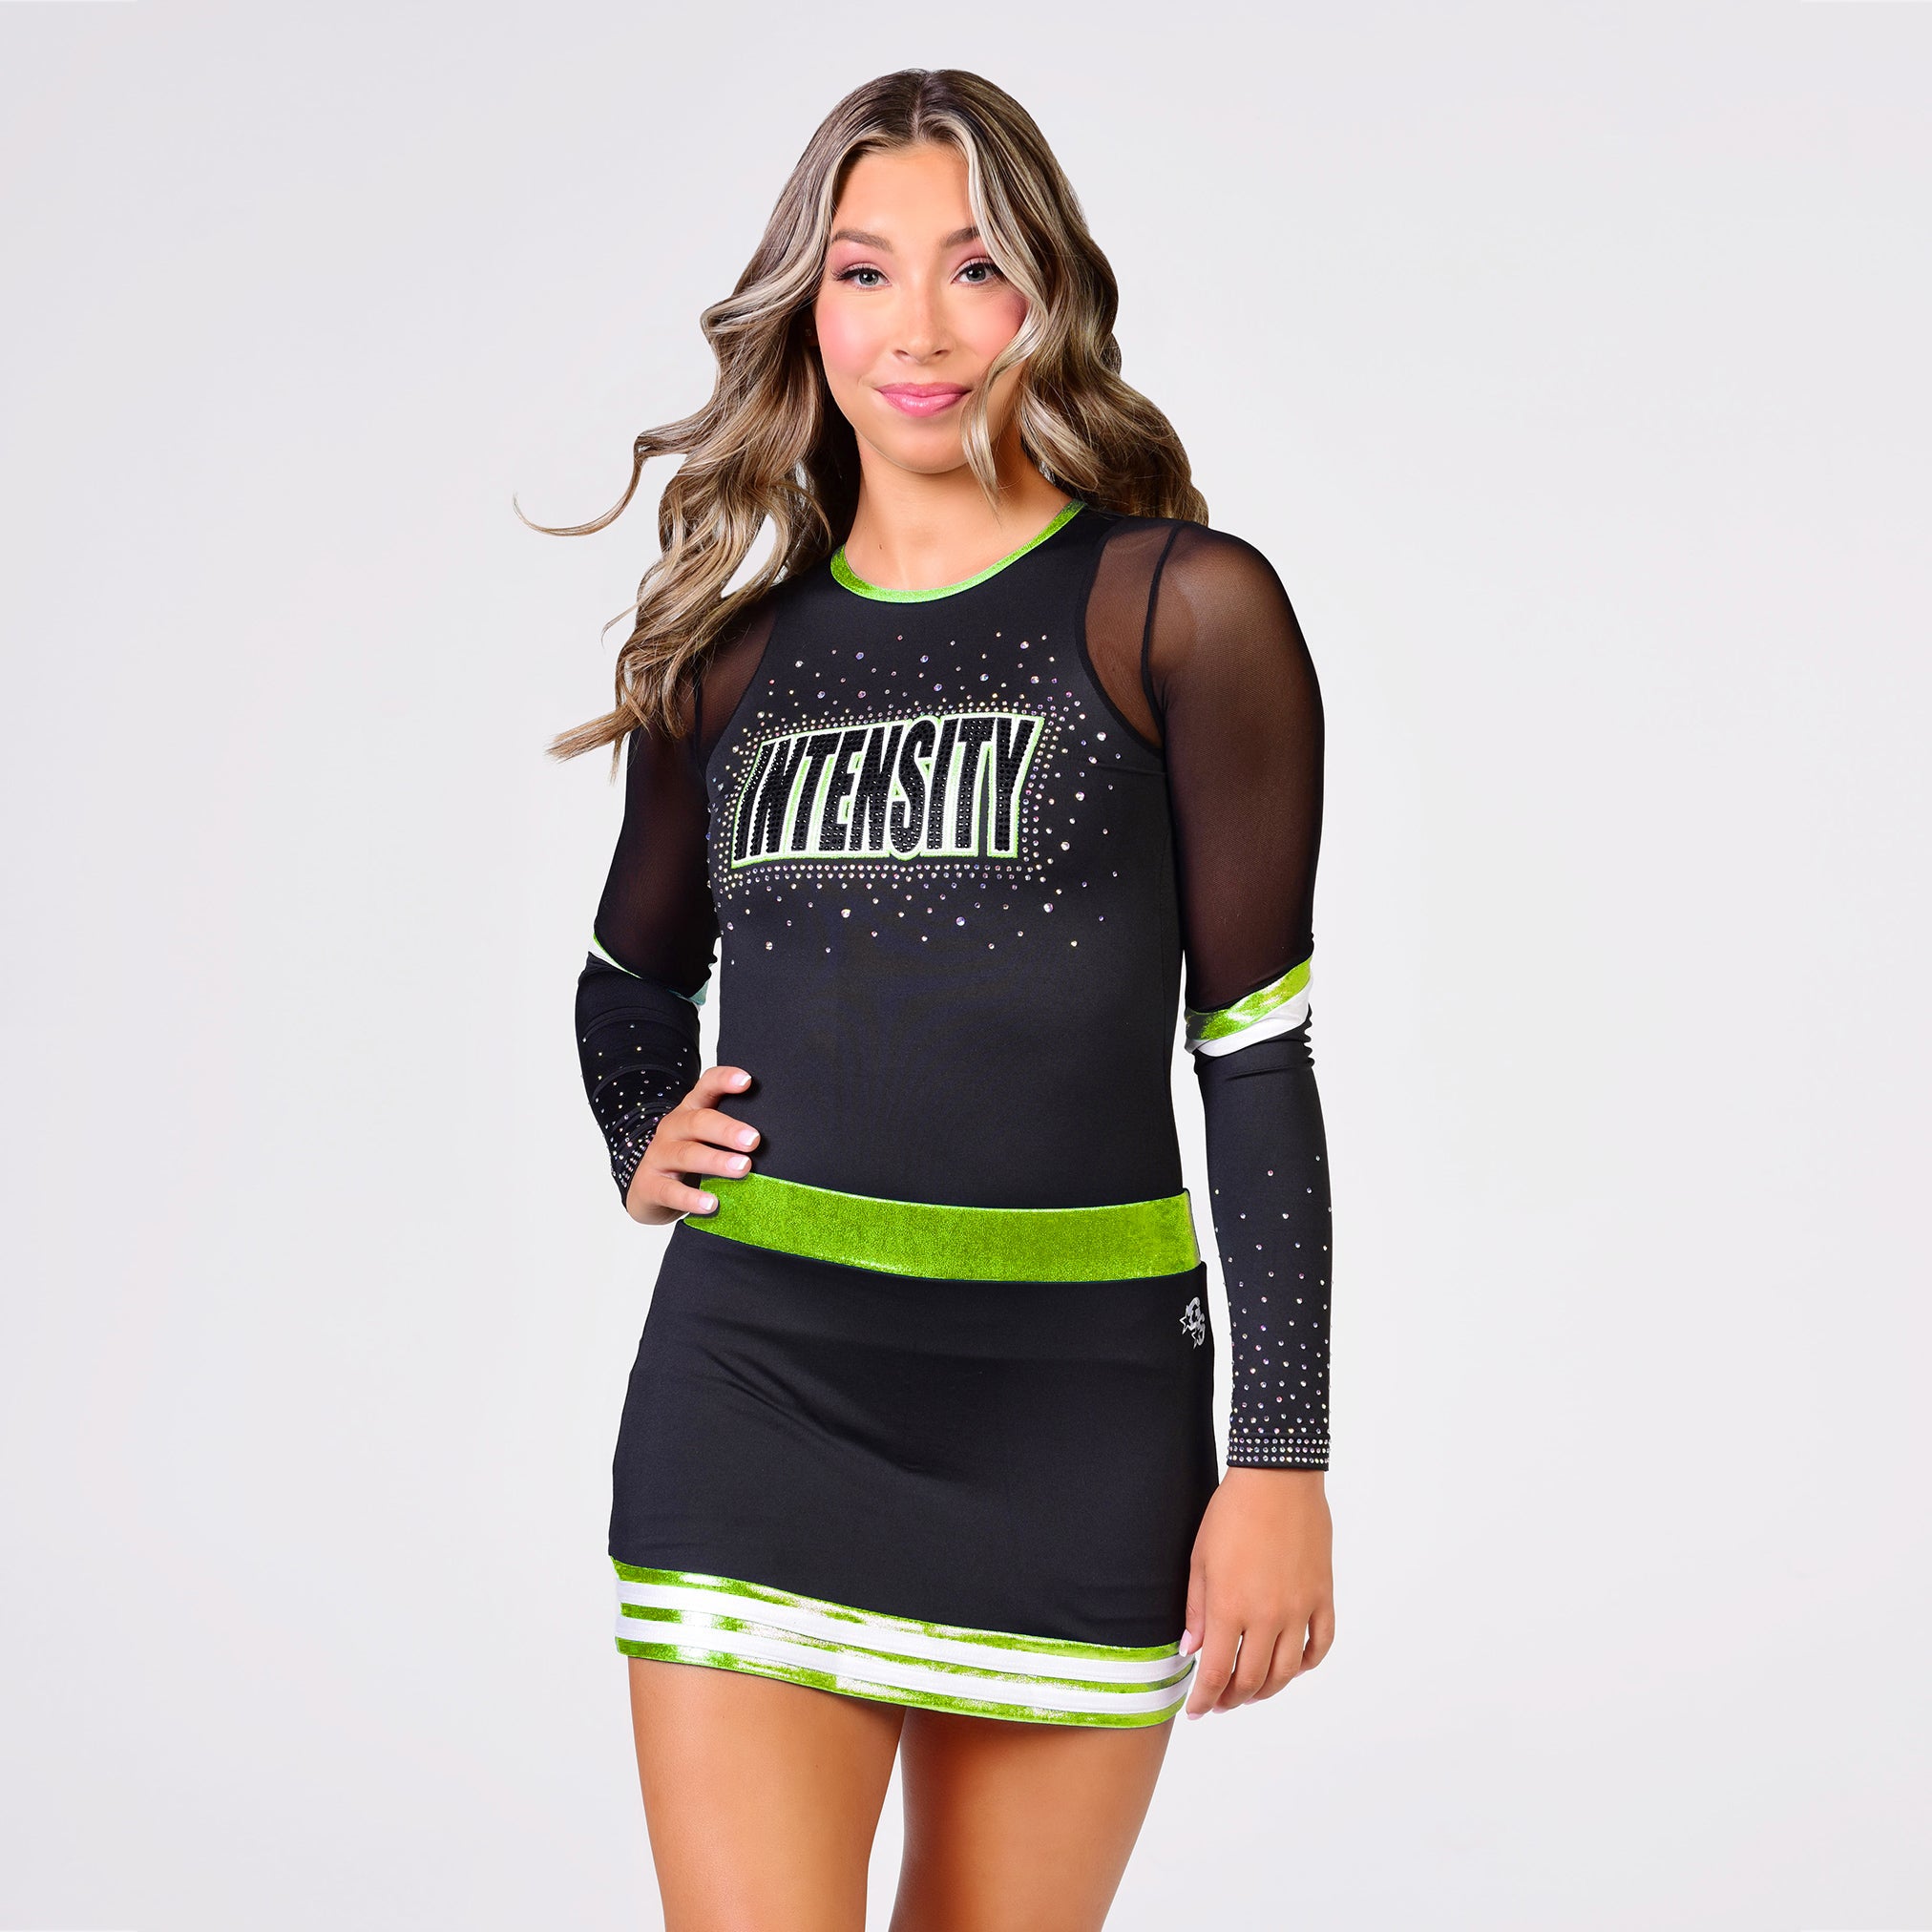 Journey Uniform with Closed Back - Lime green